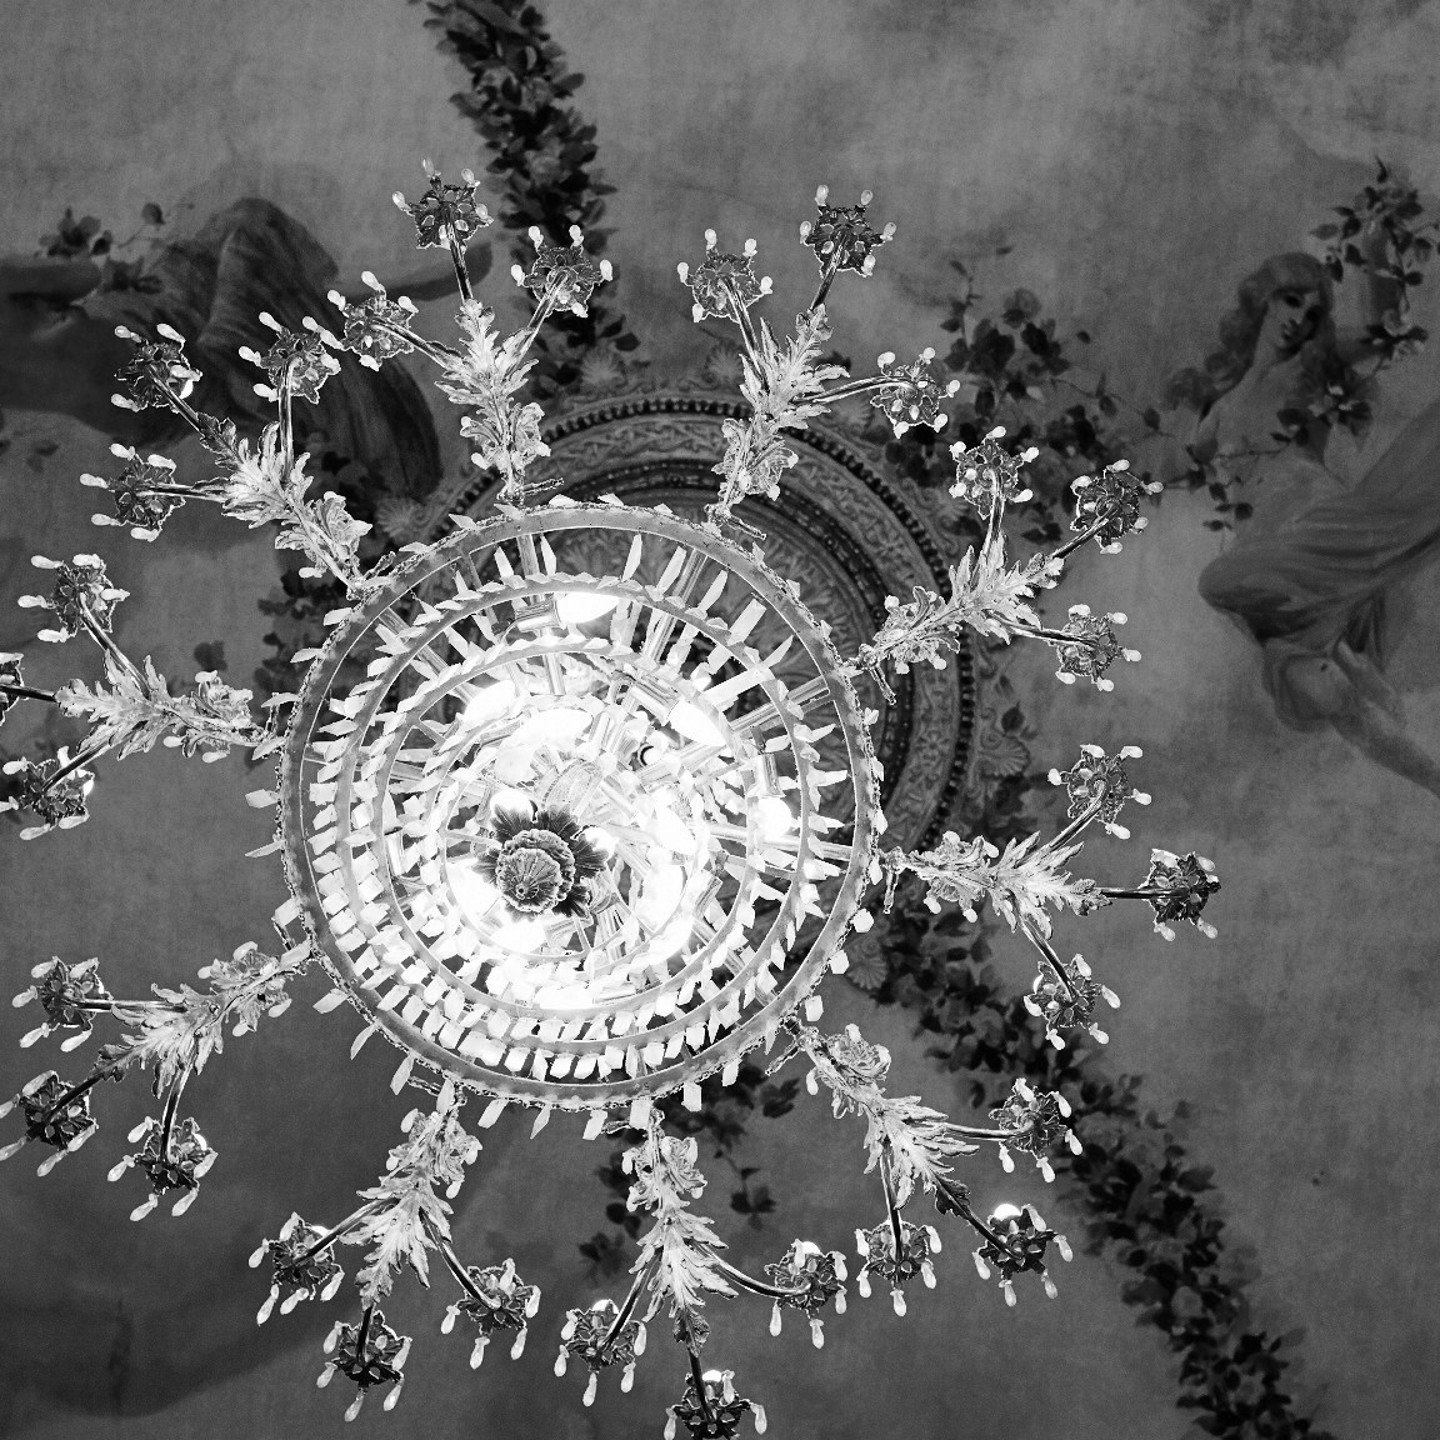 Black and white image of crystal chandelier with ceiling paintings in the background.